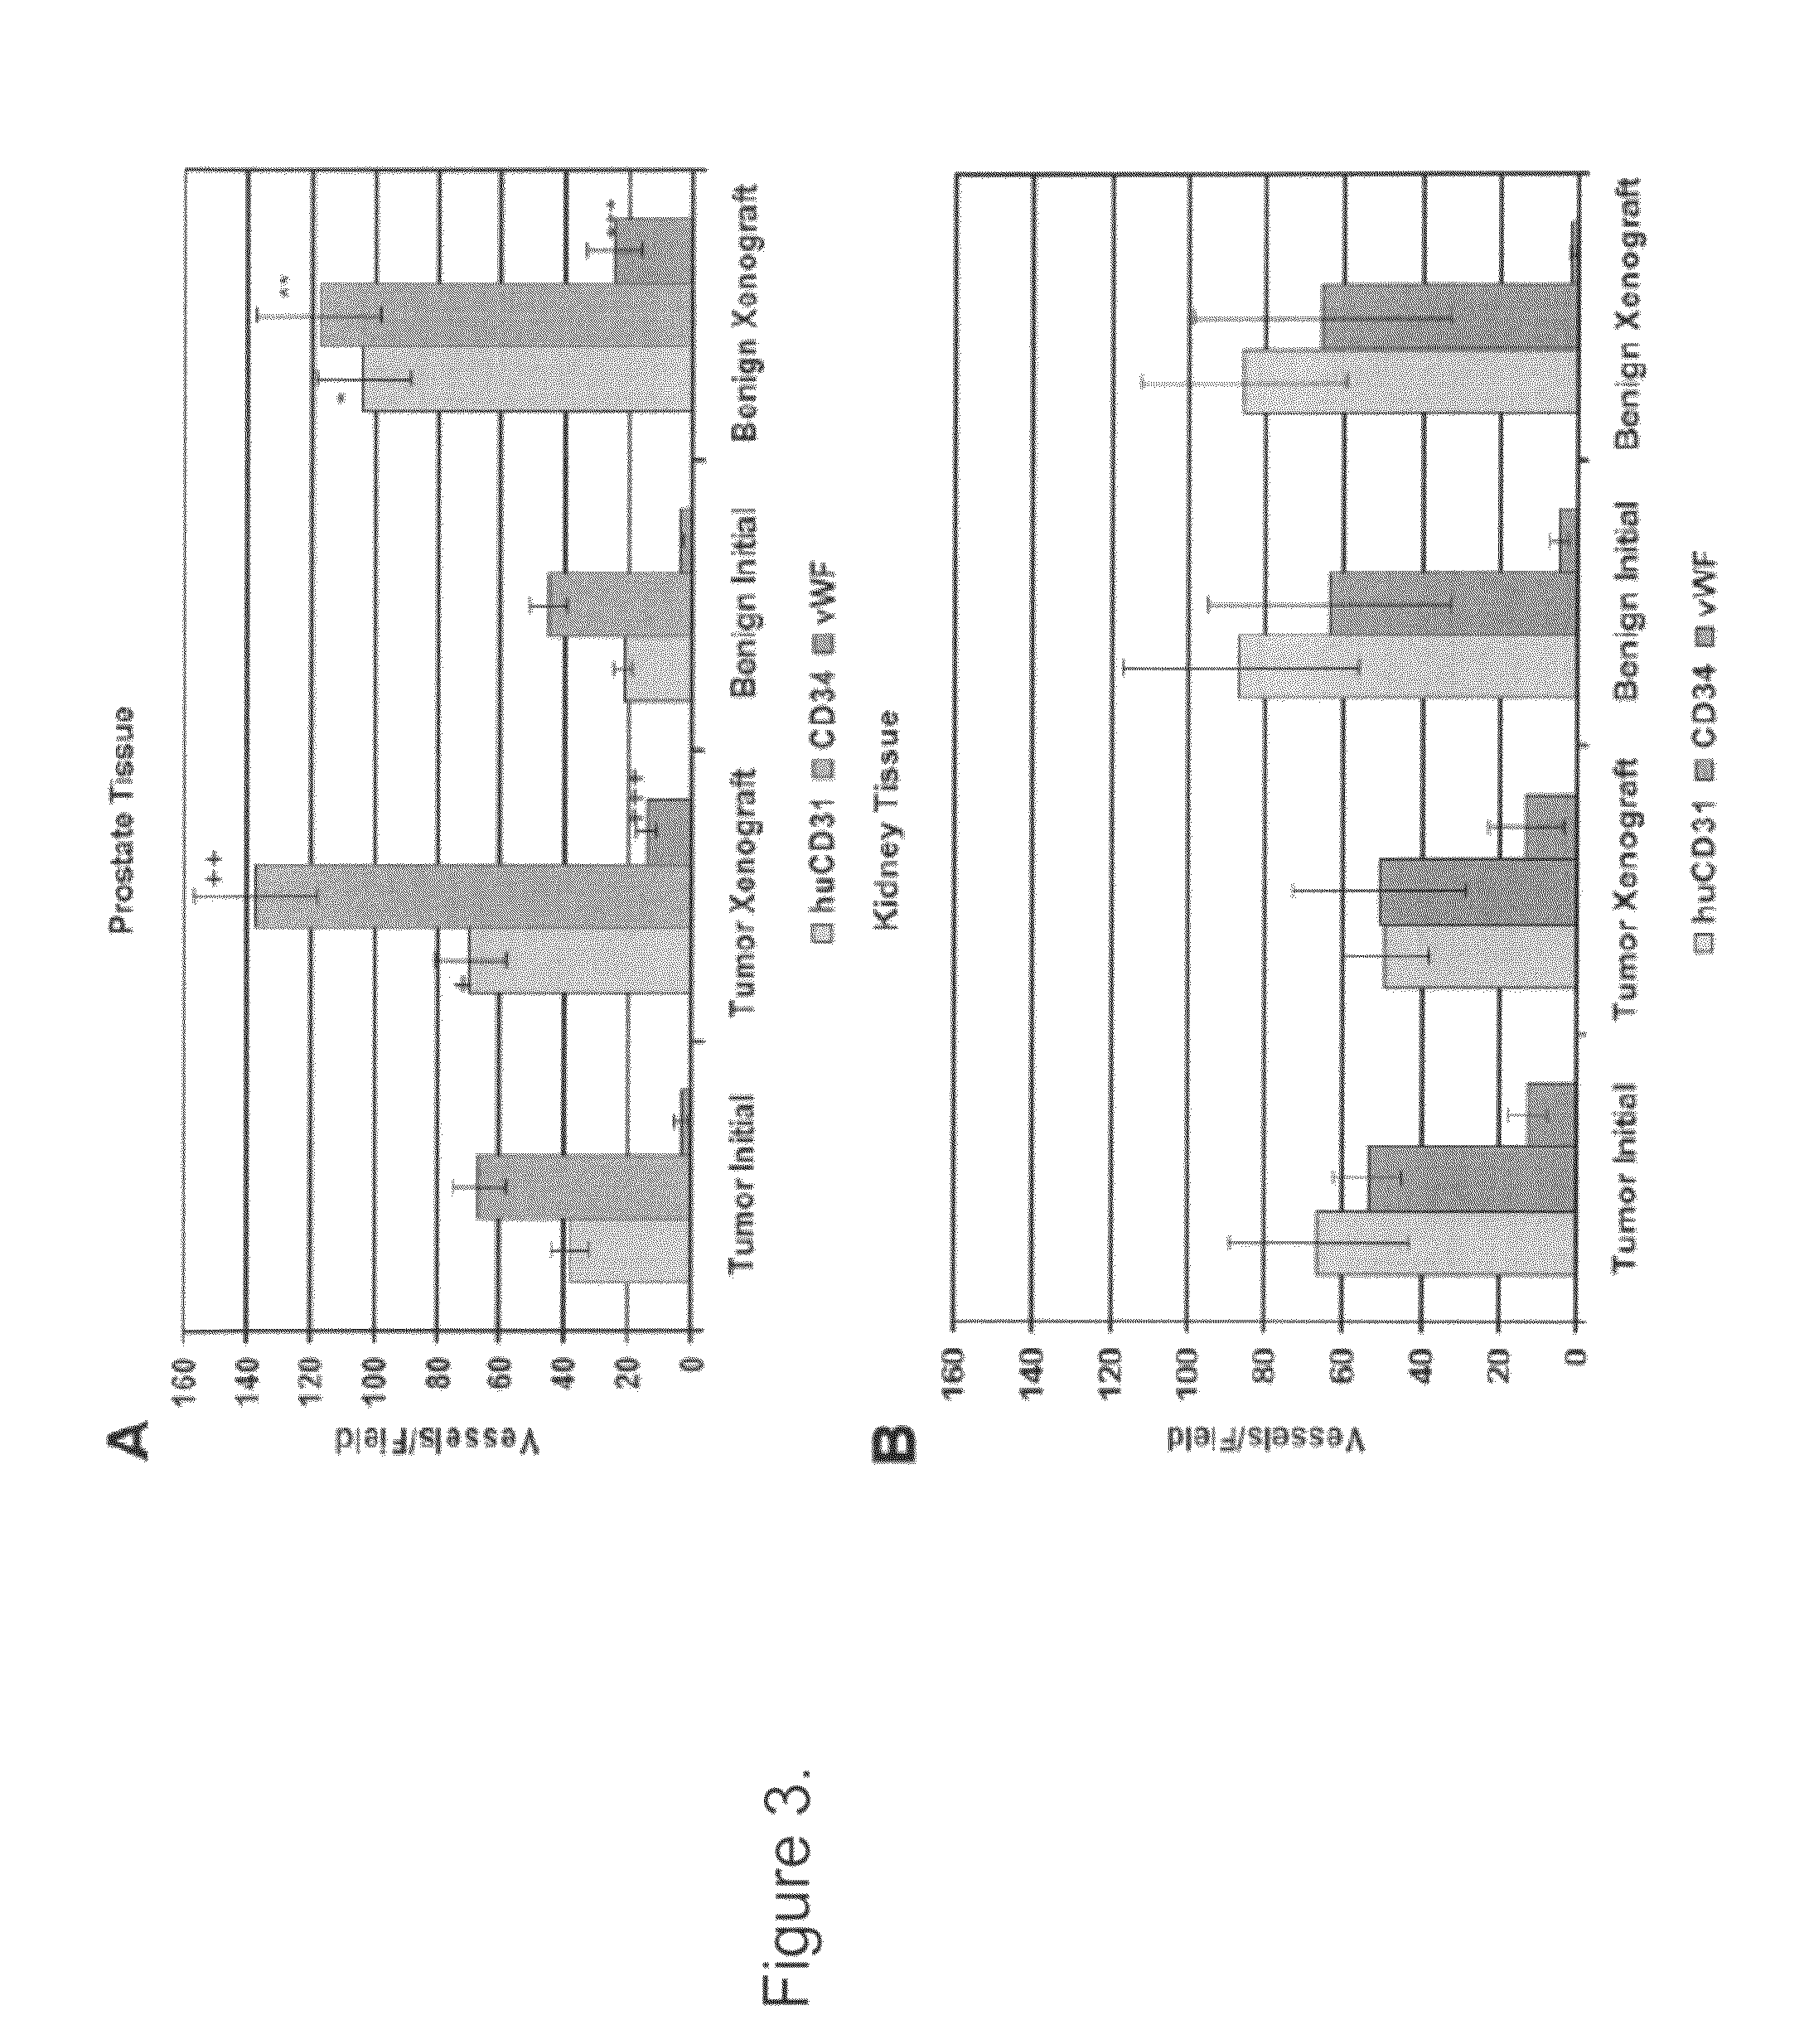 Methods for evaluating and implementing prostate disease treatments